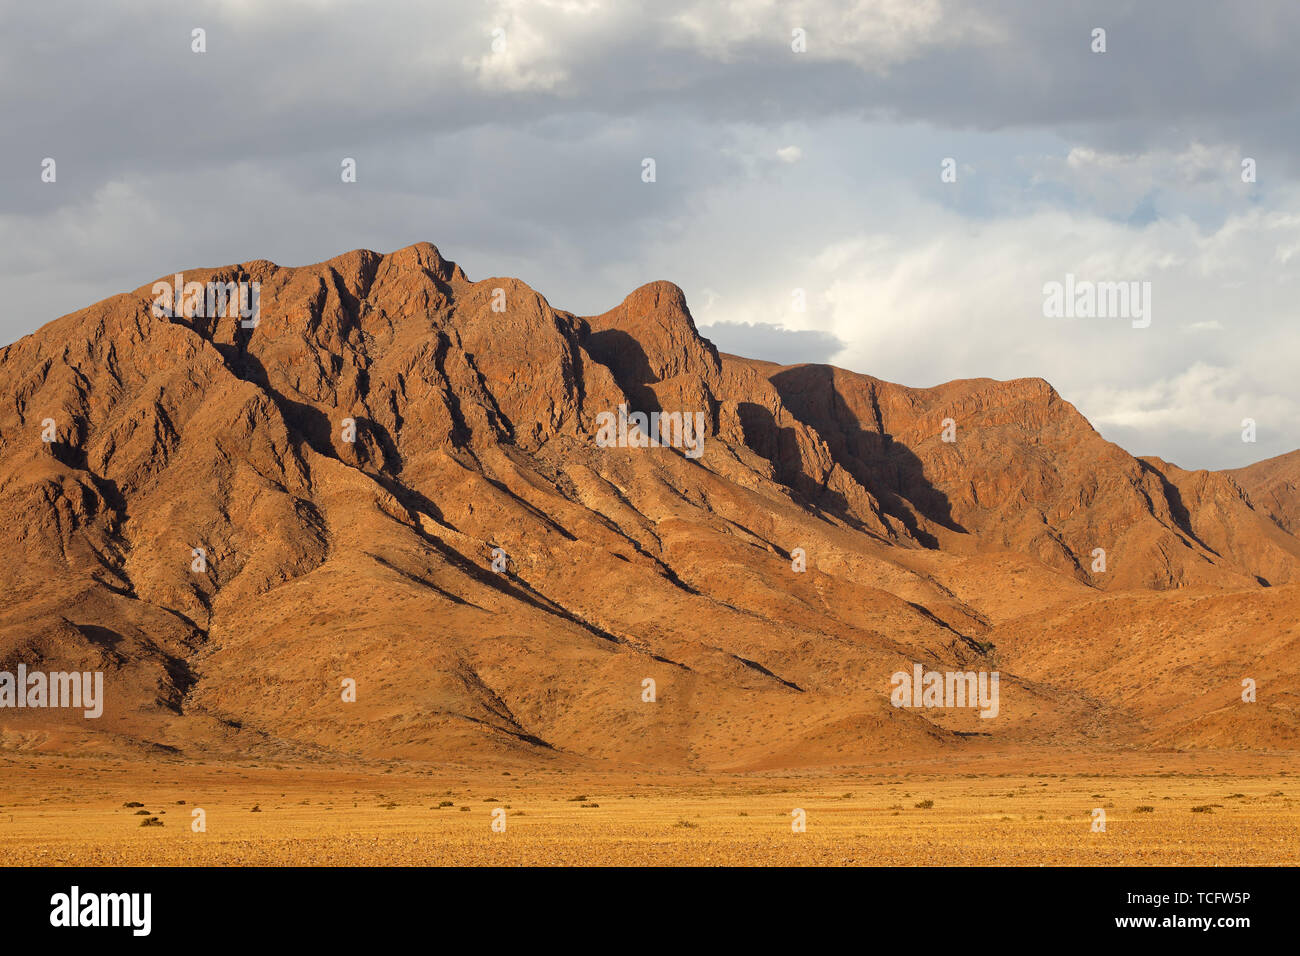 Rugged mountain landscape with cloudy sky, Namib desert, Namibia Stock Photo